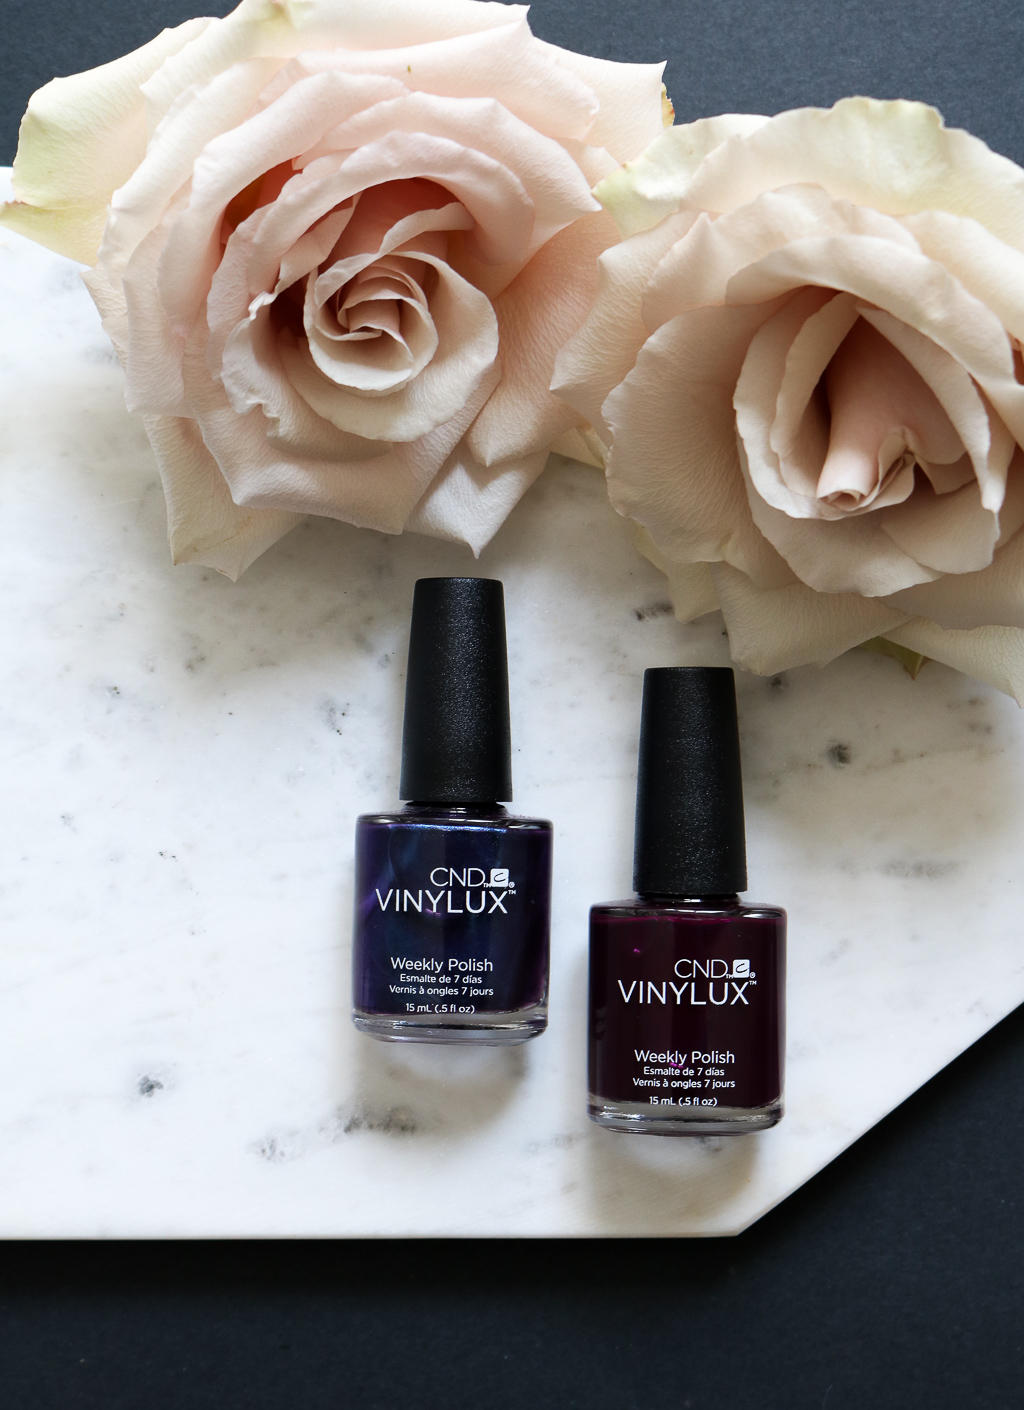 CND Vinylux Weekly Polish is so shiny and long-lasting, it's my new favourite!